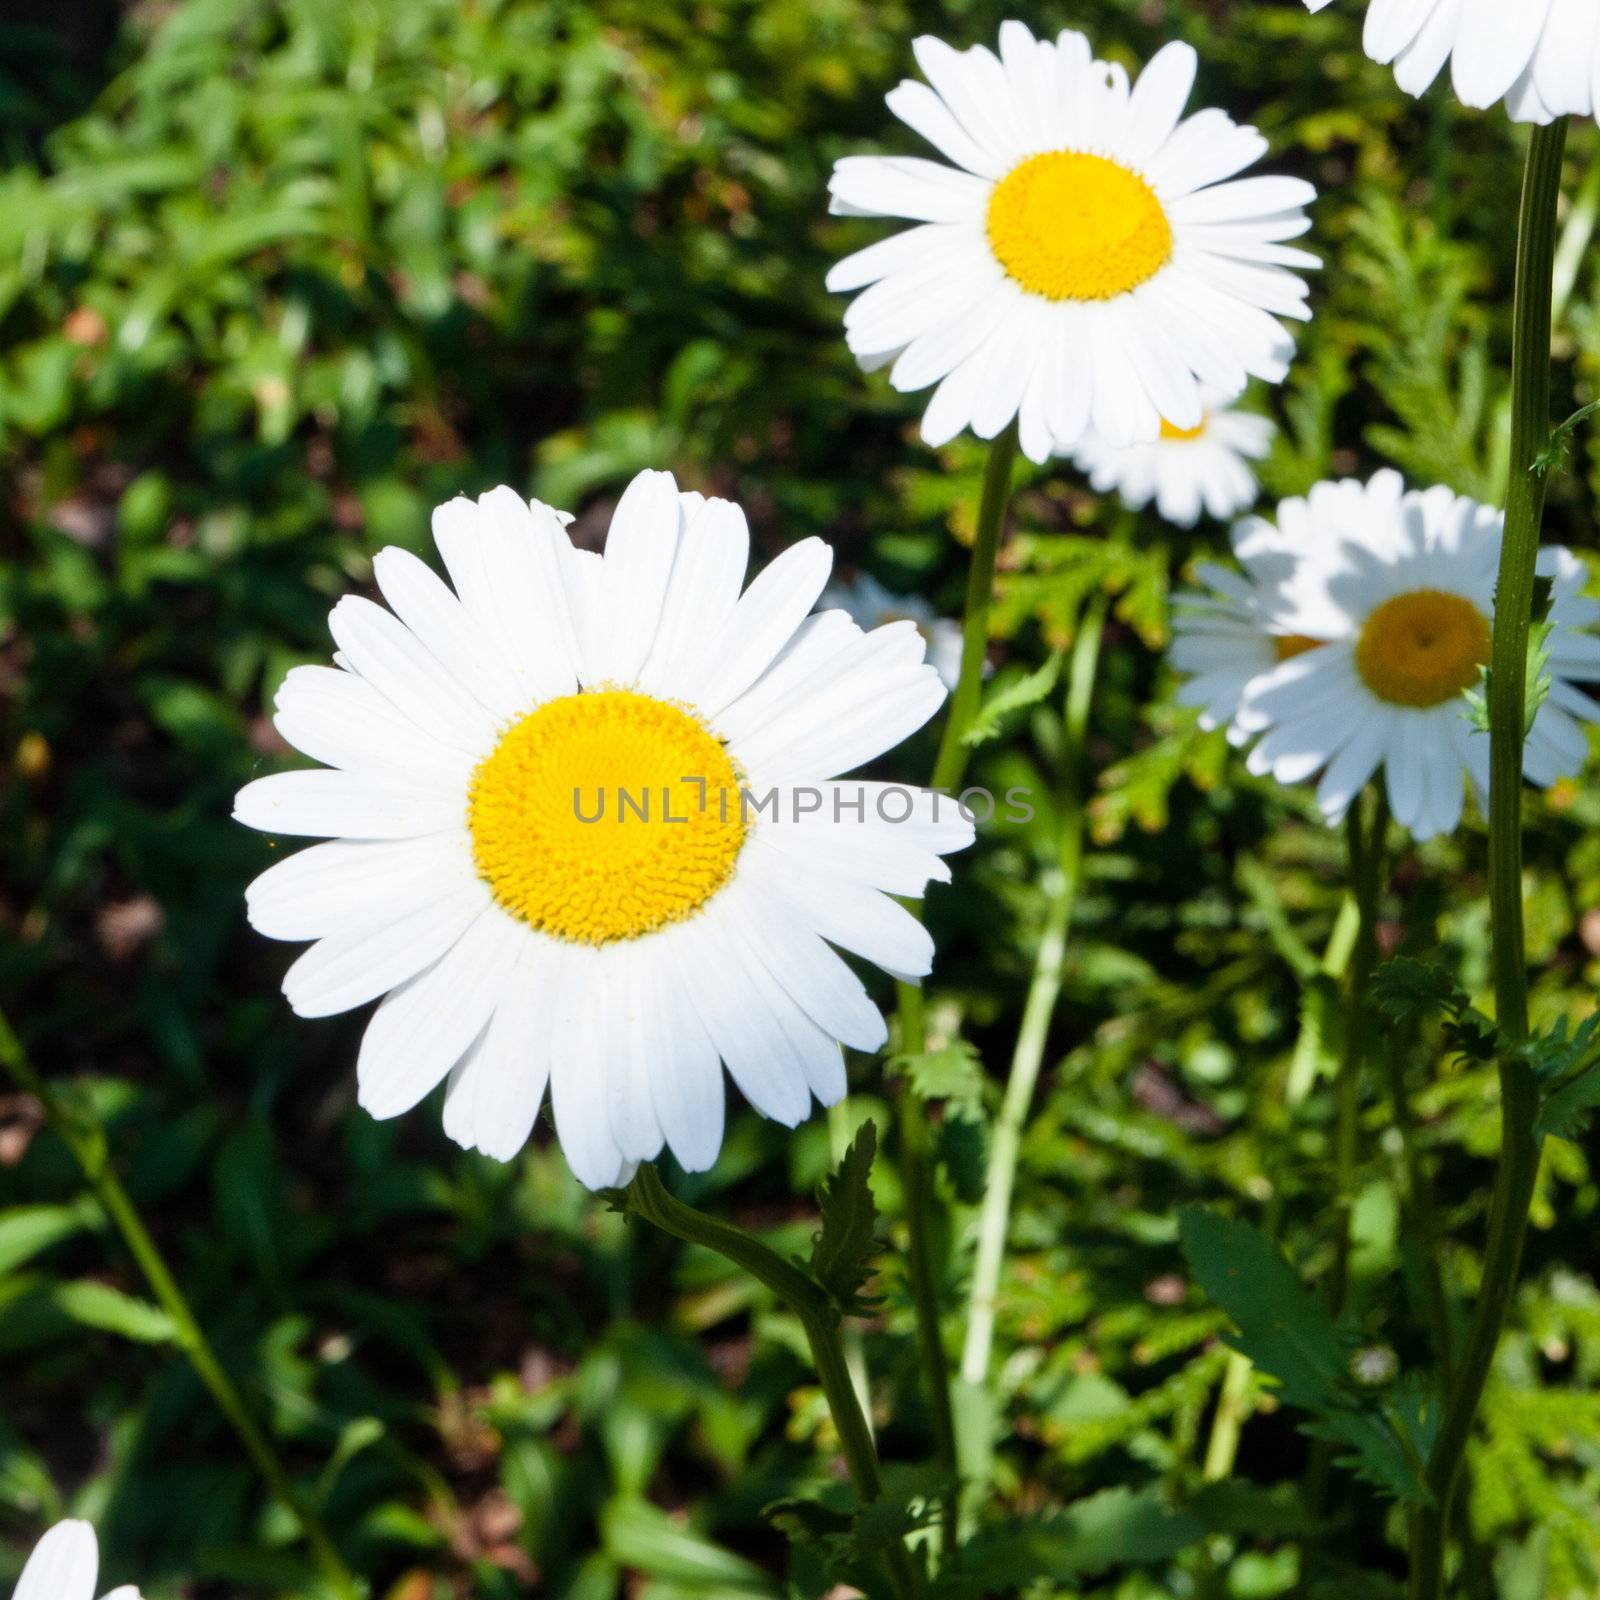 Oxeye daisy(Leucanthemum vulgare)  is a widespread flowering plant native to Europe